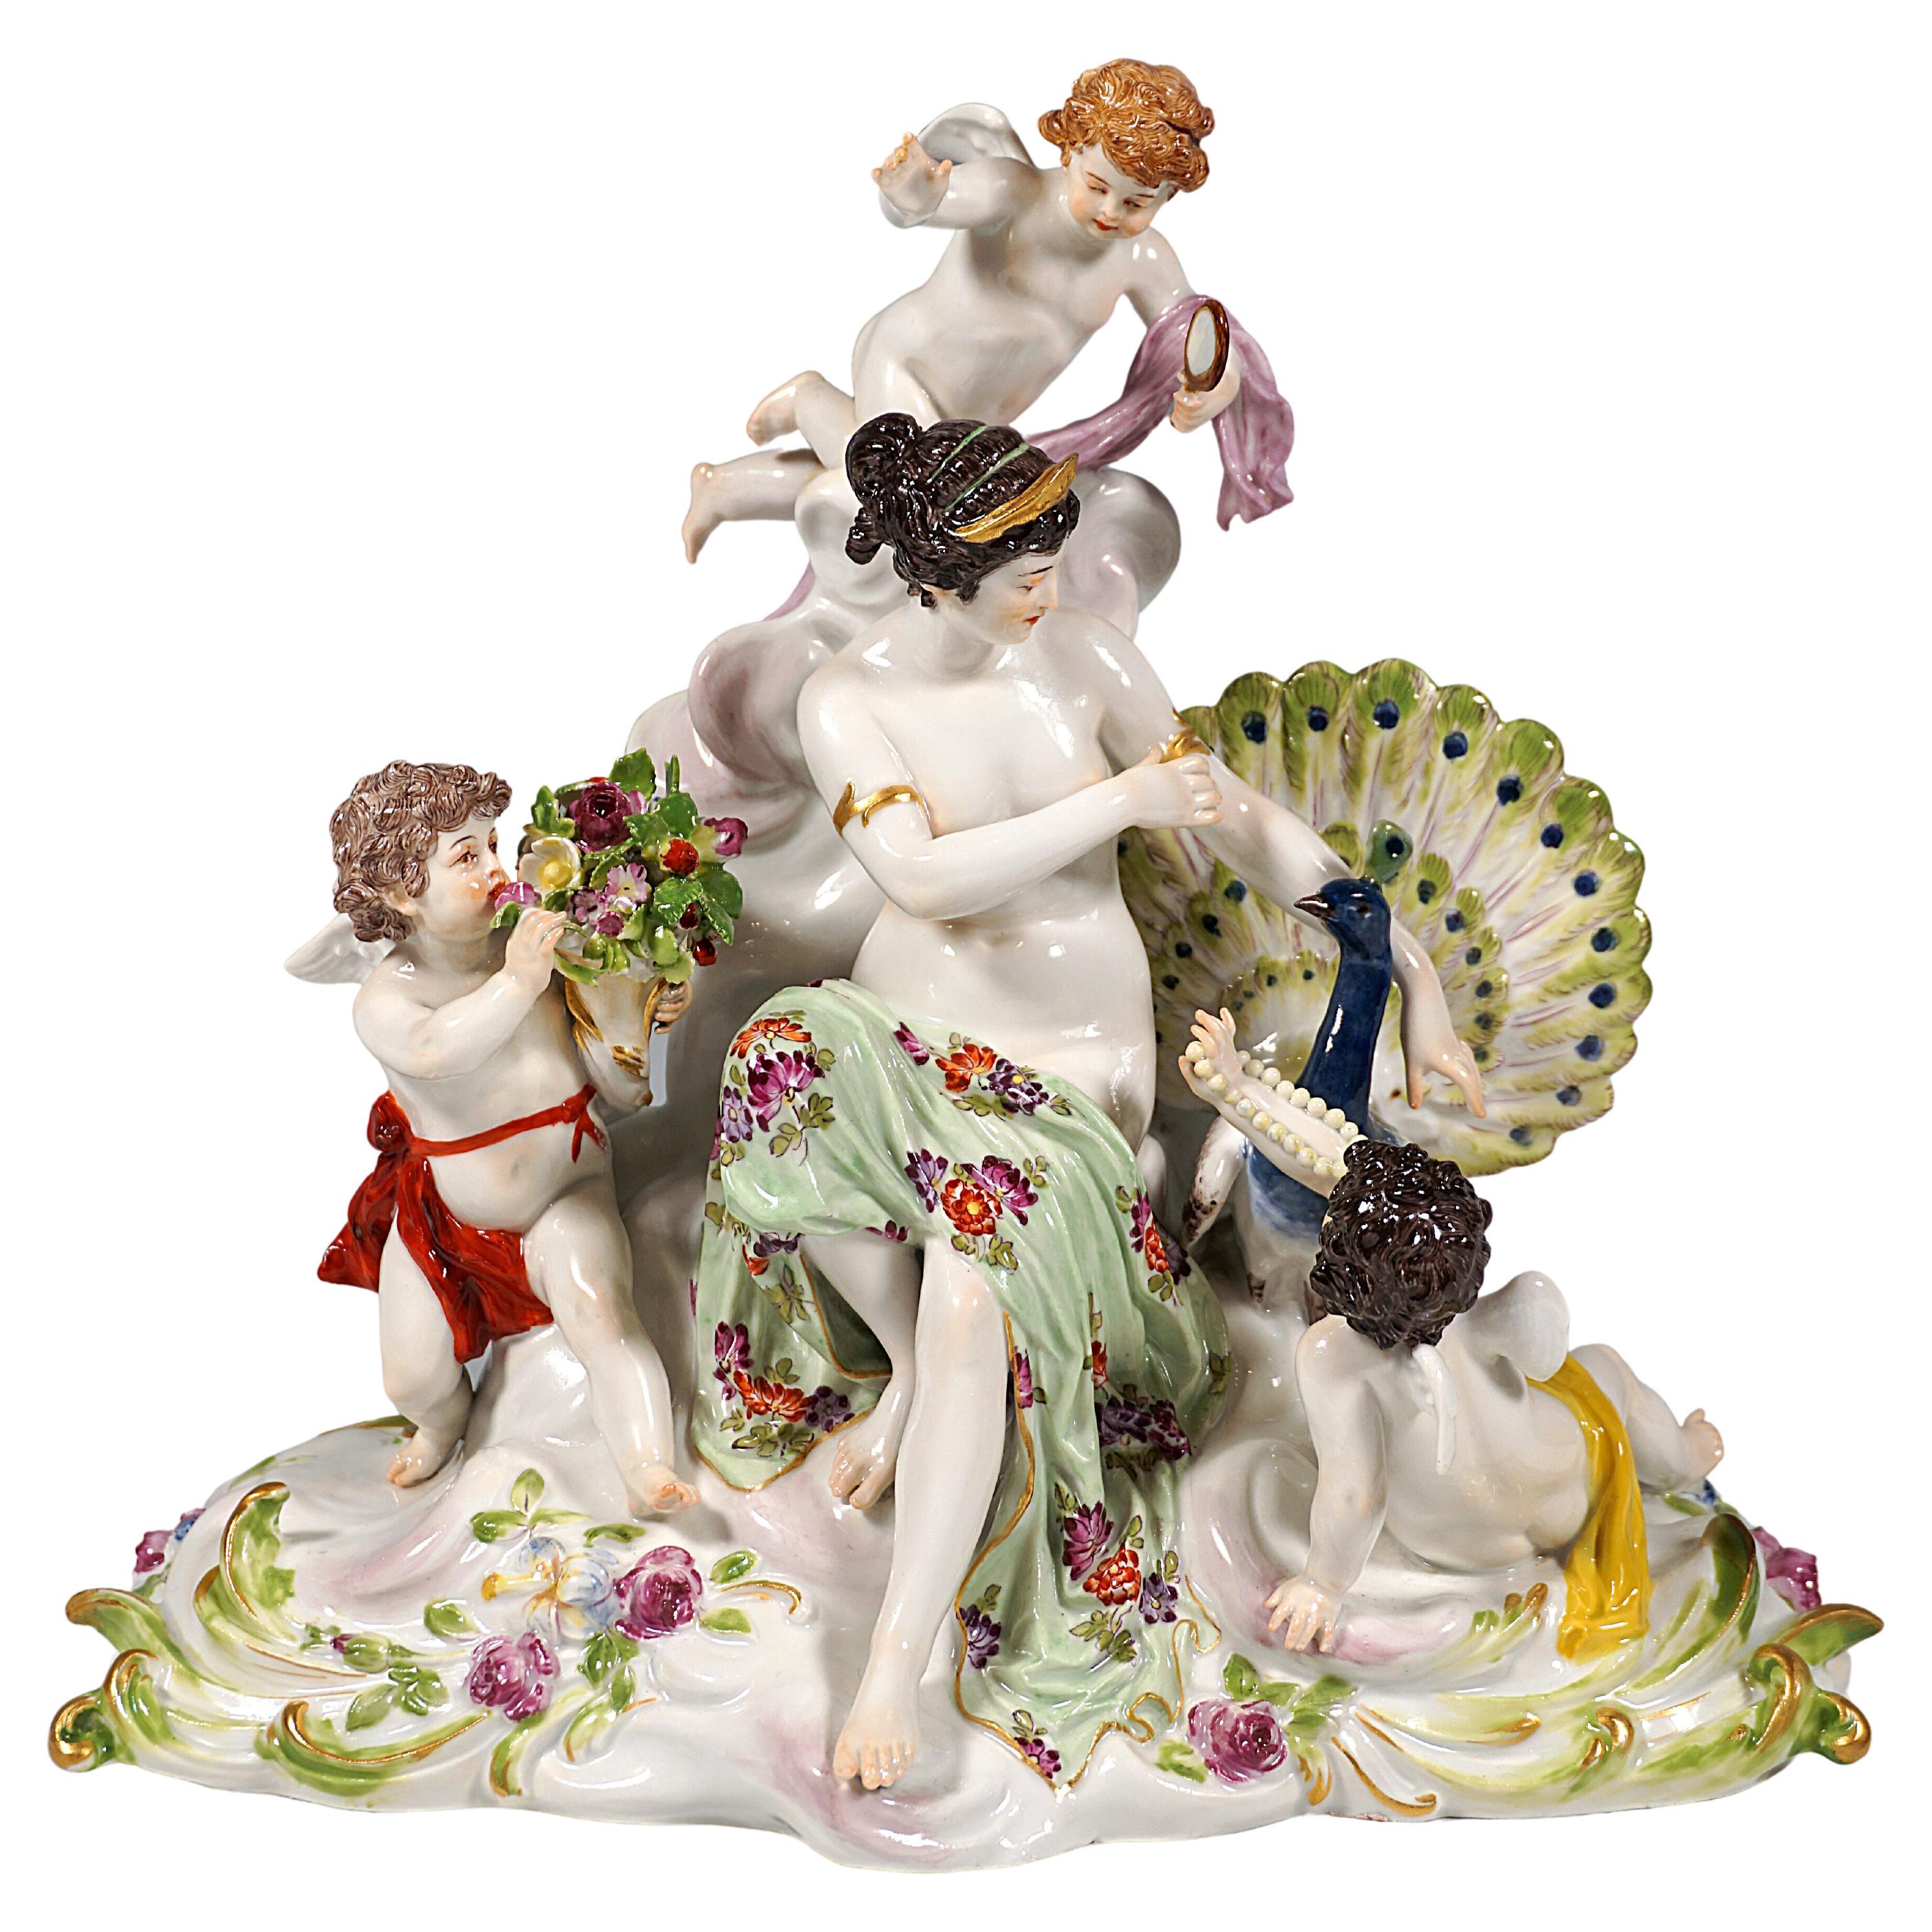 Meissen Art Nouveau Group 'the Air' by Paul Helmig, Germany, Around 1900